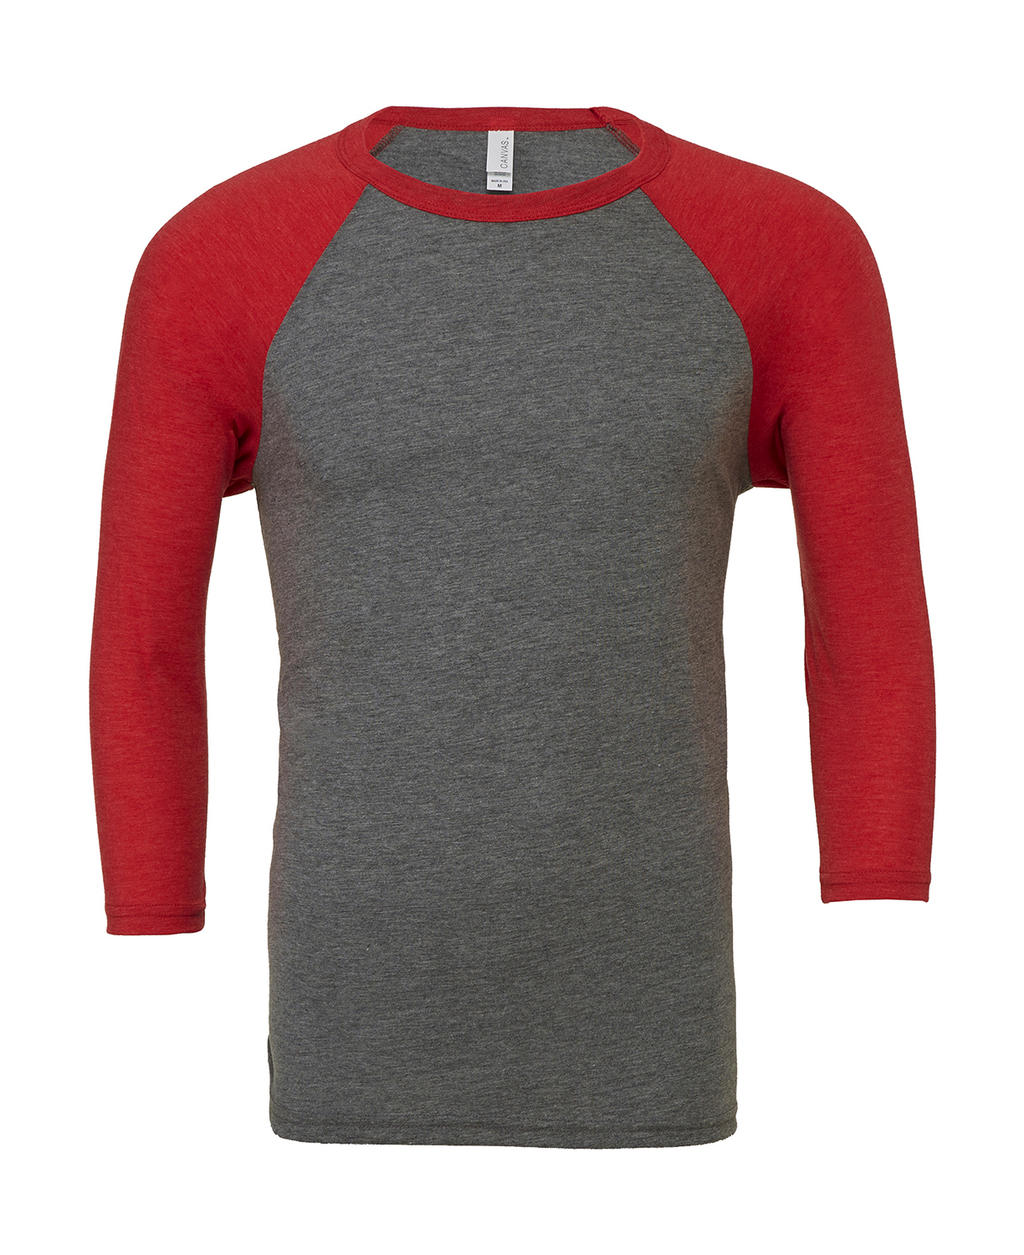  Unisex 3/4 Sleeve Baseball T-Shirt in Farbe Grey/Red Triblend